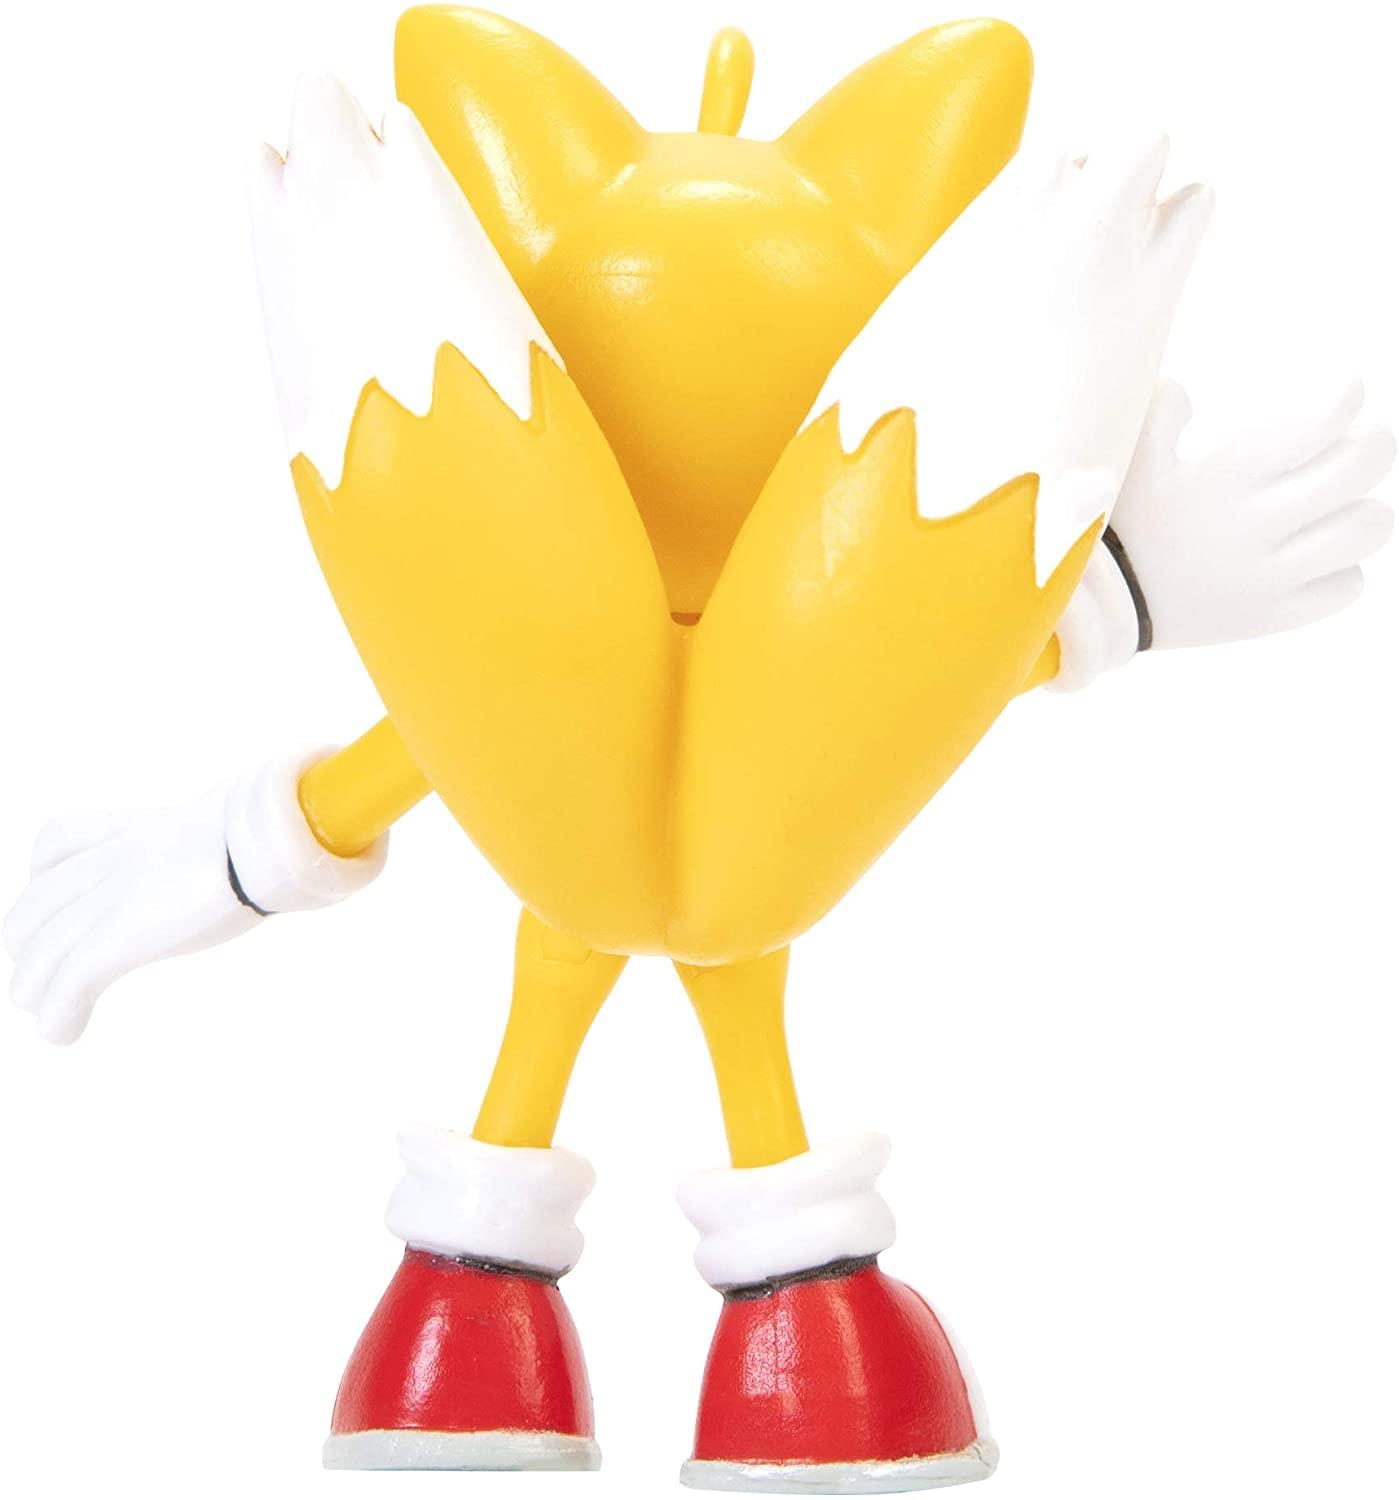 Sonic the Hedgehog 2.5 Inch Action Figure | Modern Tails